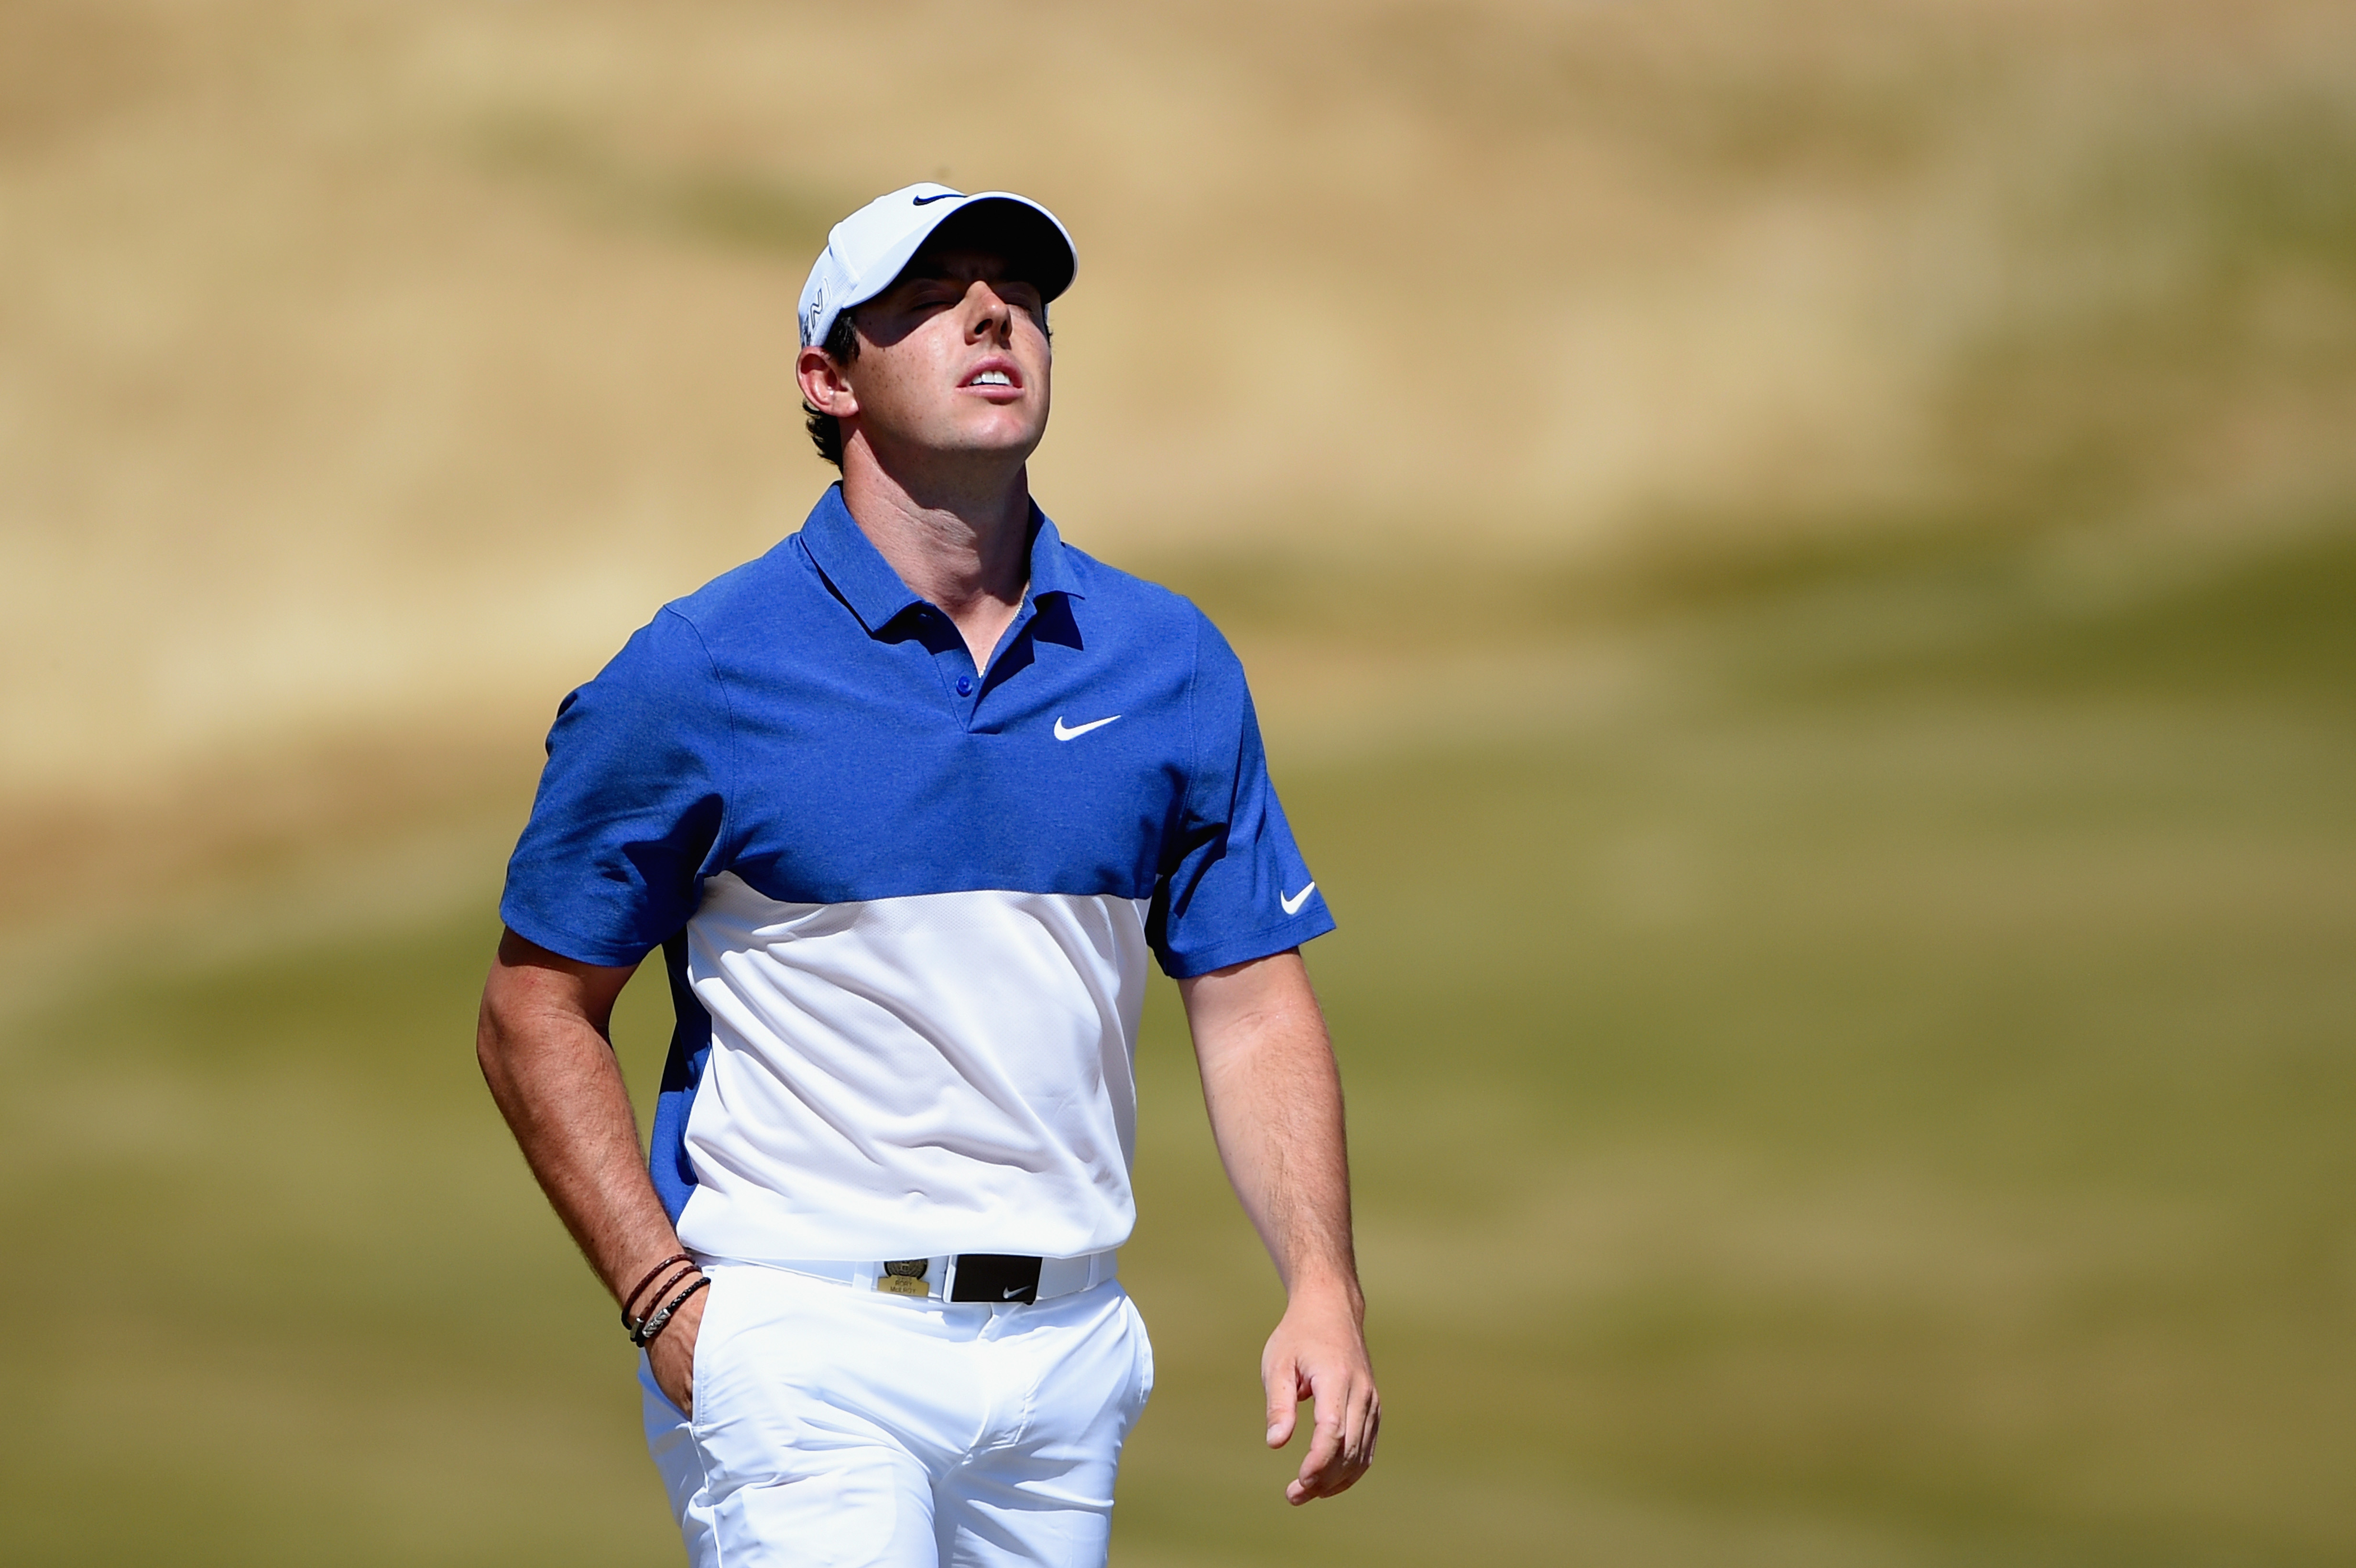 McIlroy finished joint ninth in the US Open at Chambers Bay (Photo: Getty Images) 